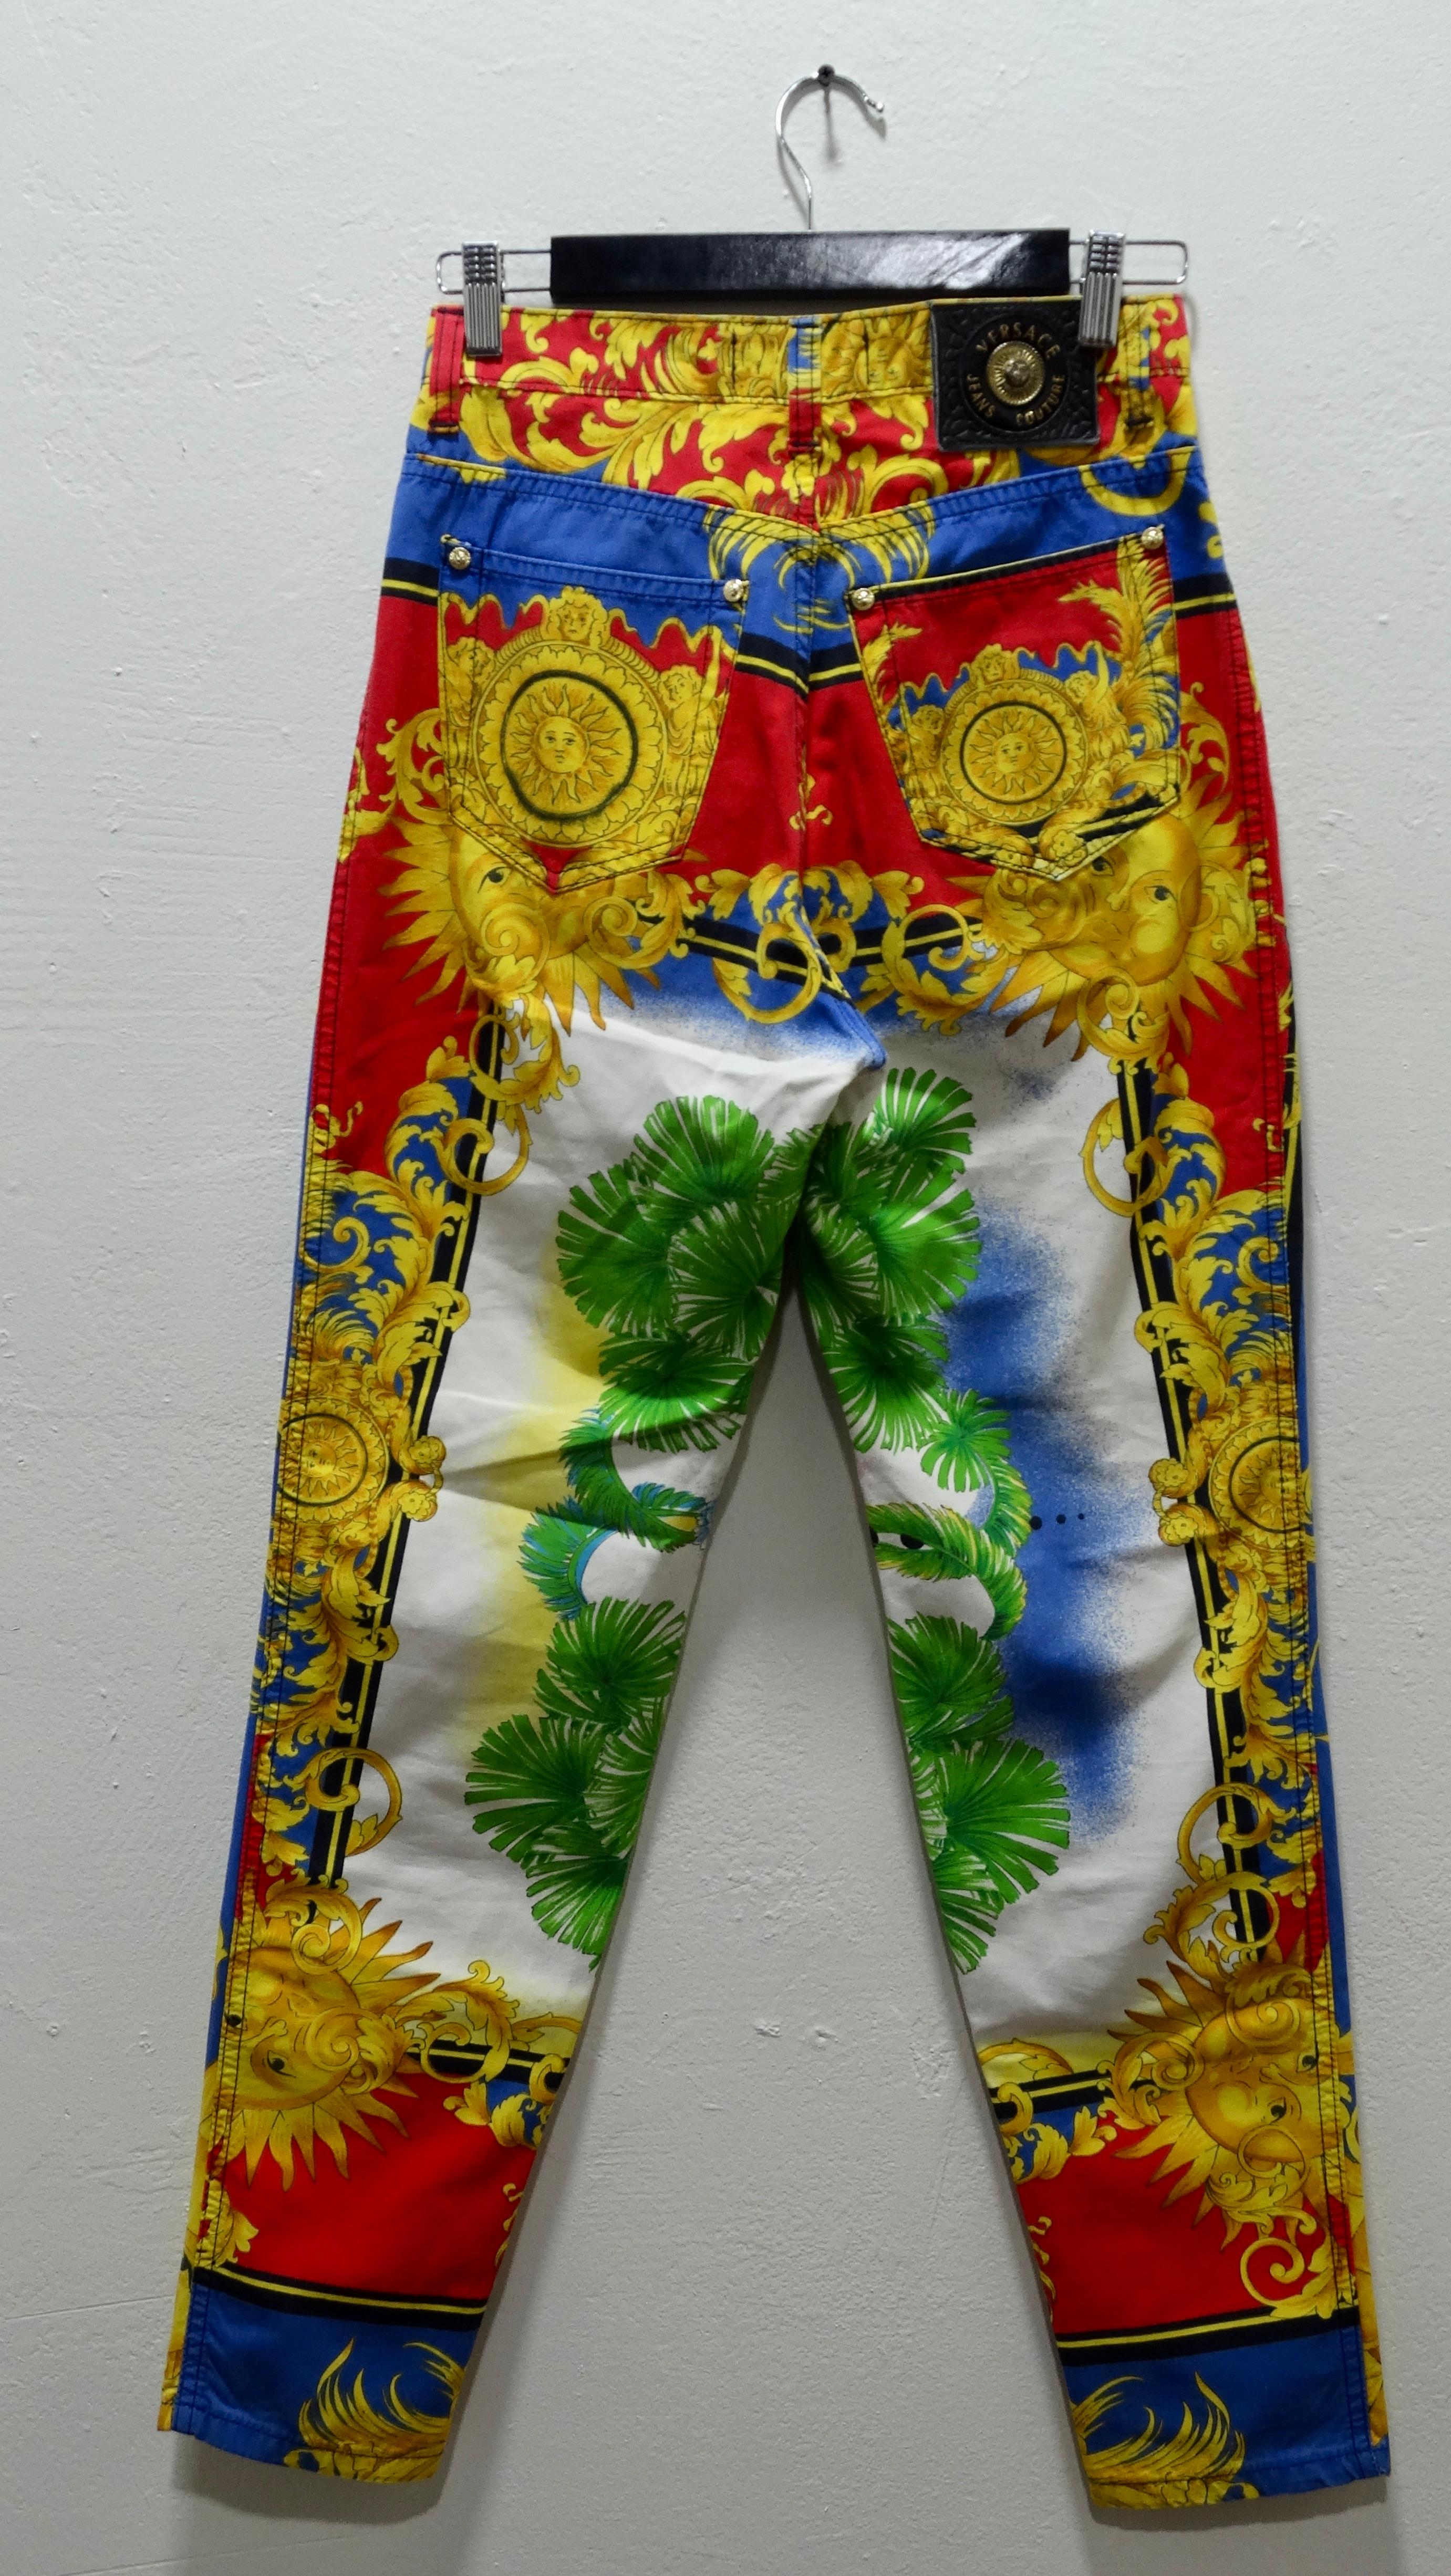 Beautiful Baroque!! Feel as bright as the sun in these stunning 1993 baroque sun print jeans from Gianni Versace Couture! These jeans feature stunning colors of red, blue, green and gold and beautiful celestial sun designs throughout. These jeans